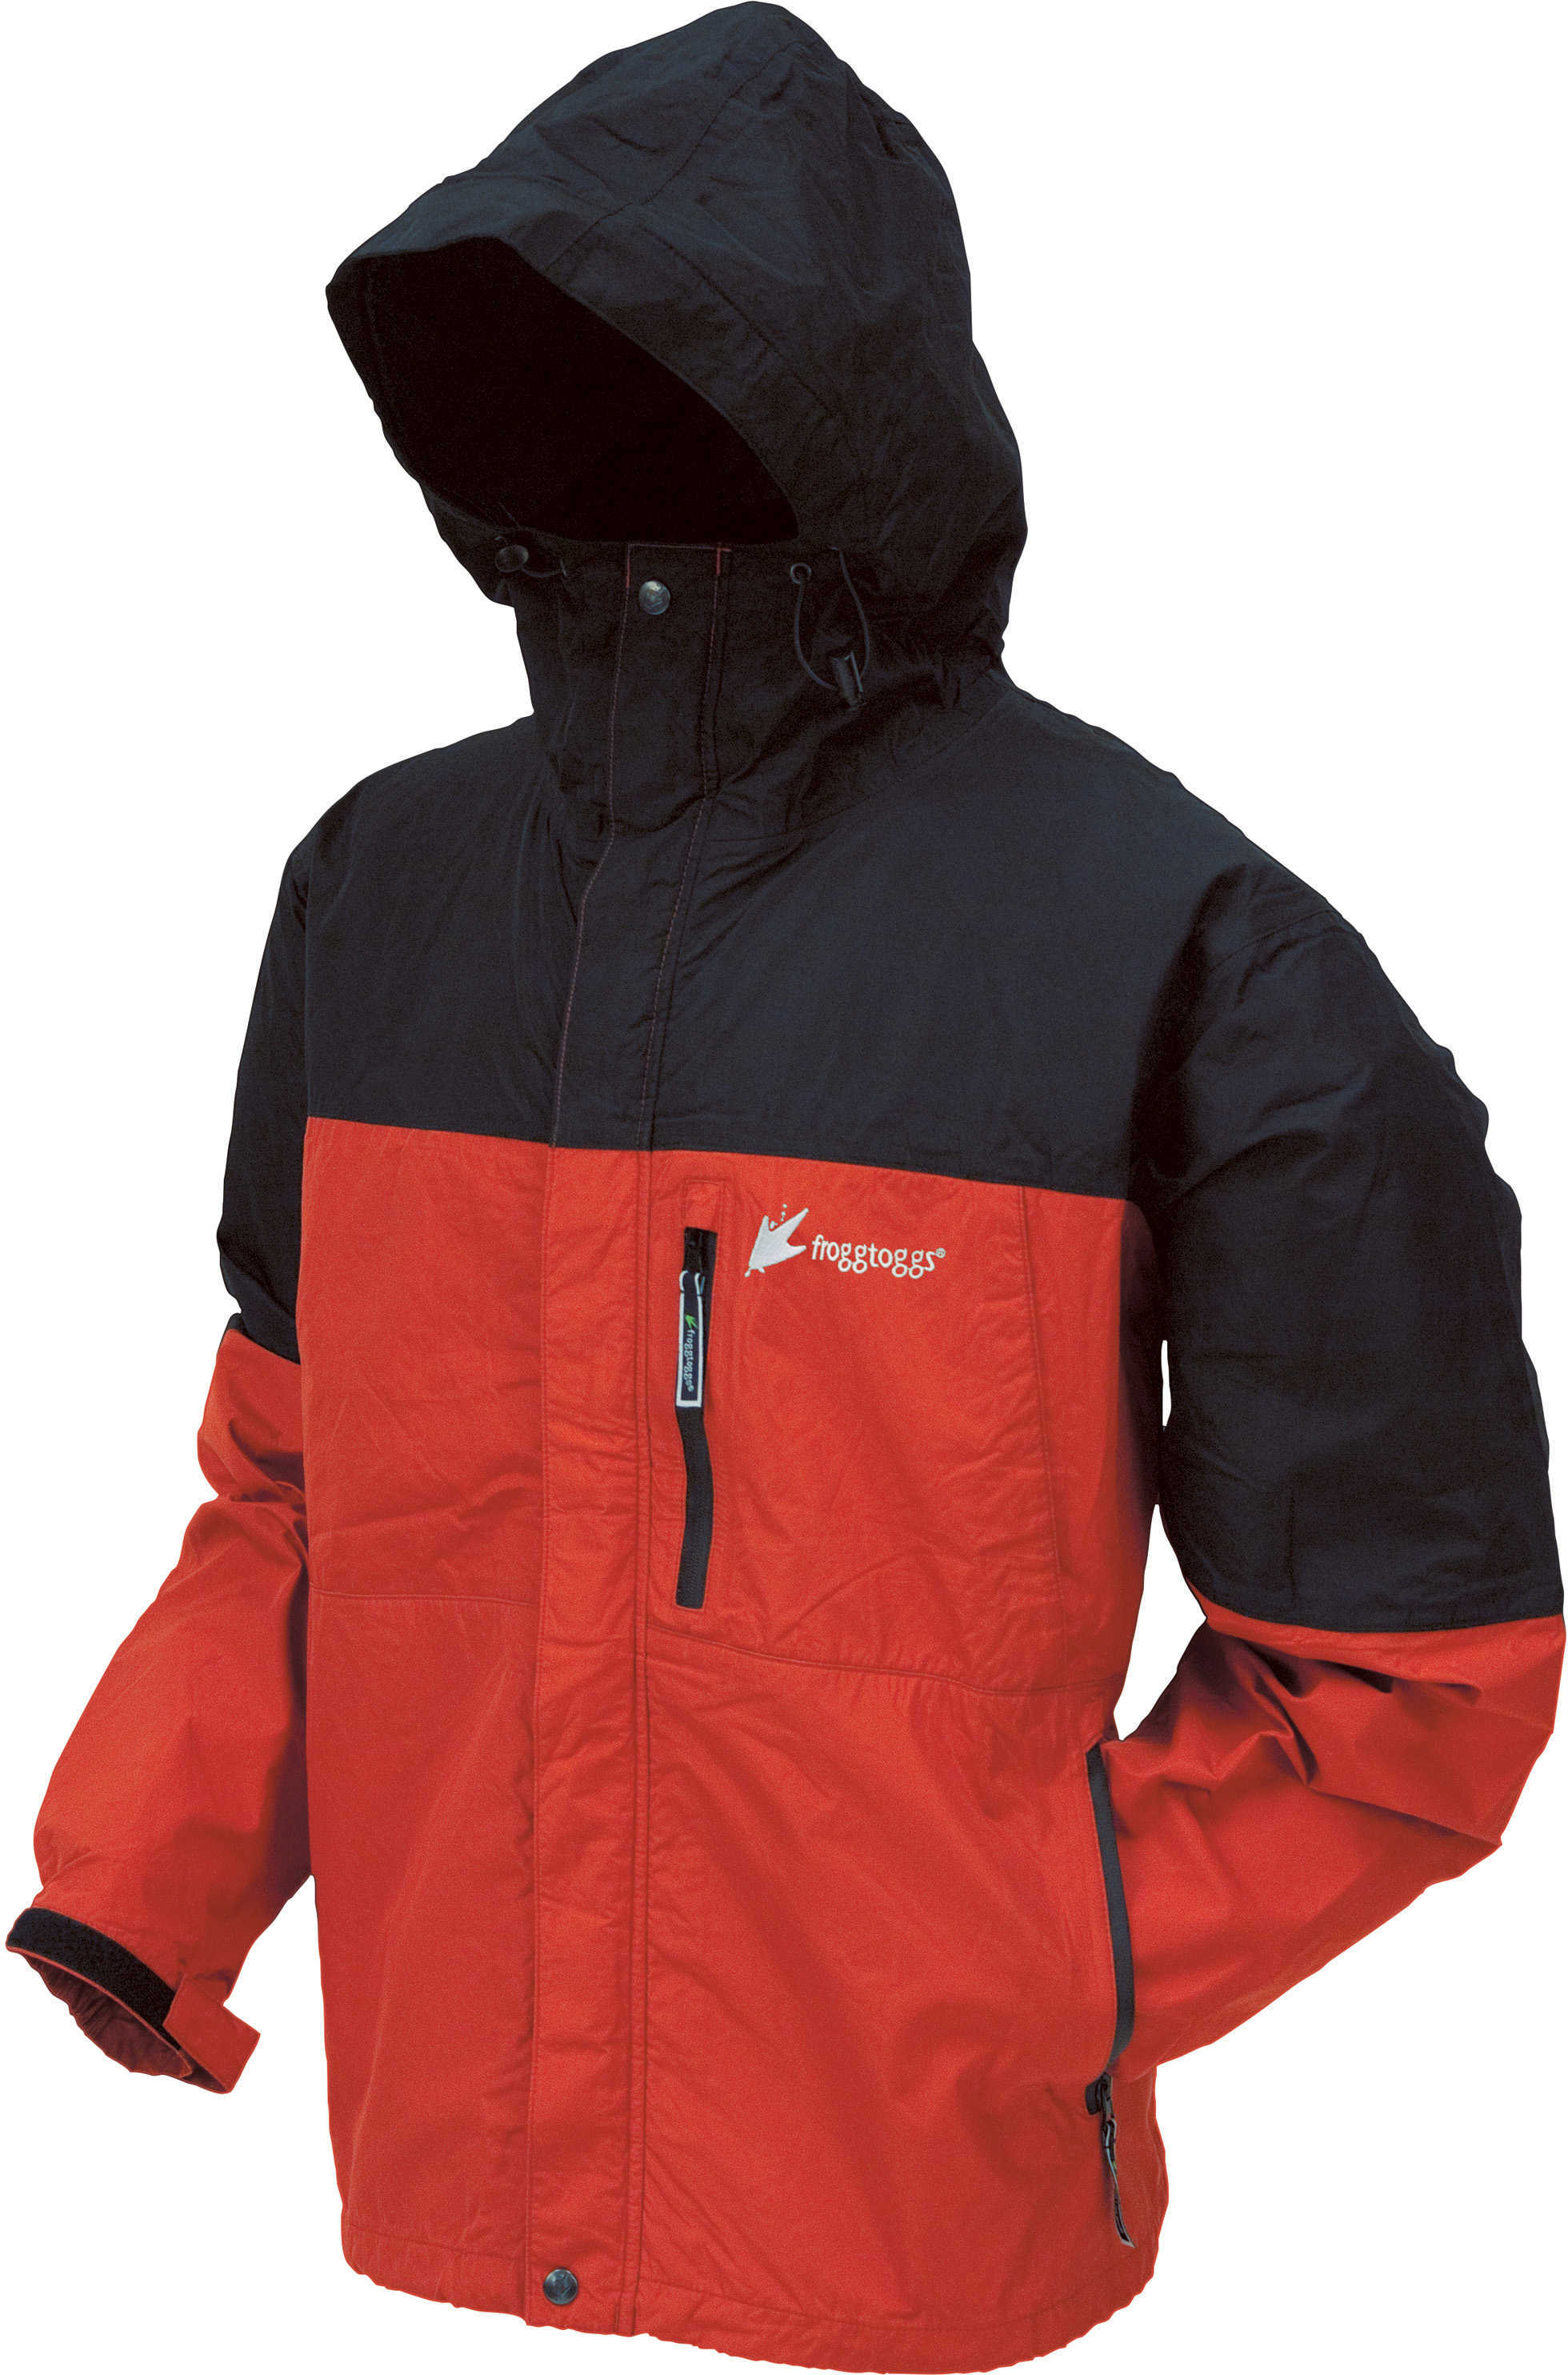 Frogg Toggs Toad-Rage Jacket Red/Black Large NT6601-110LG